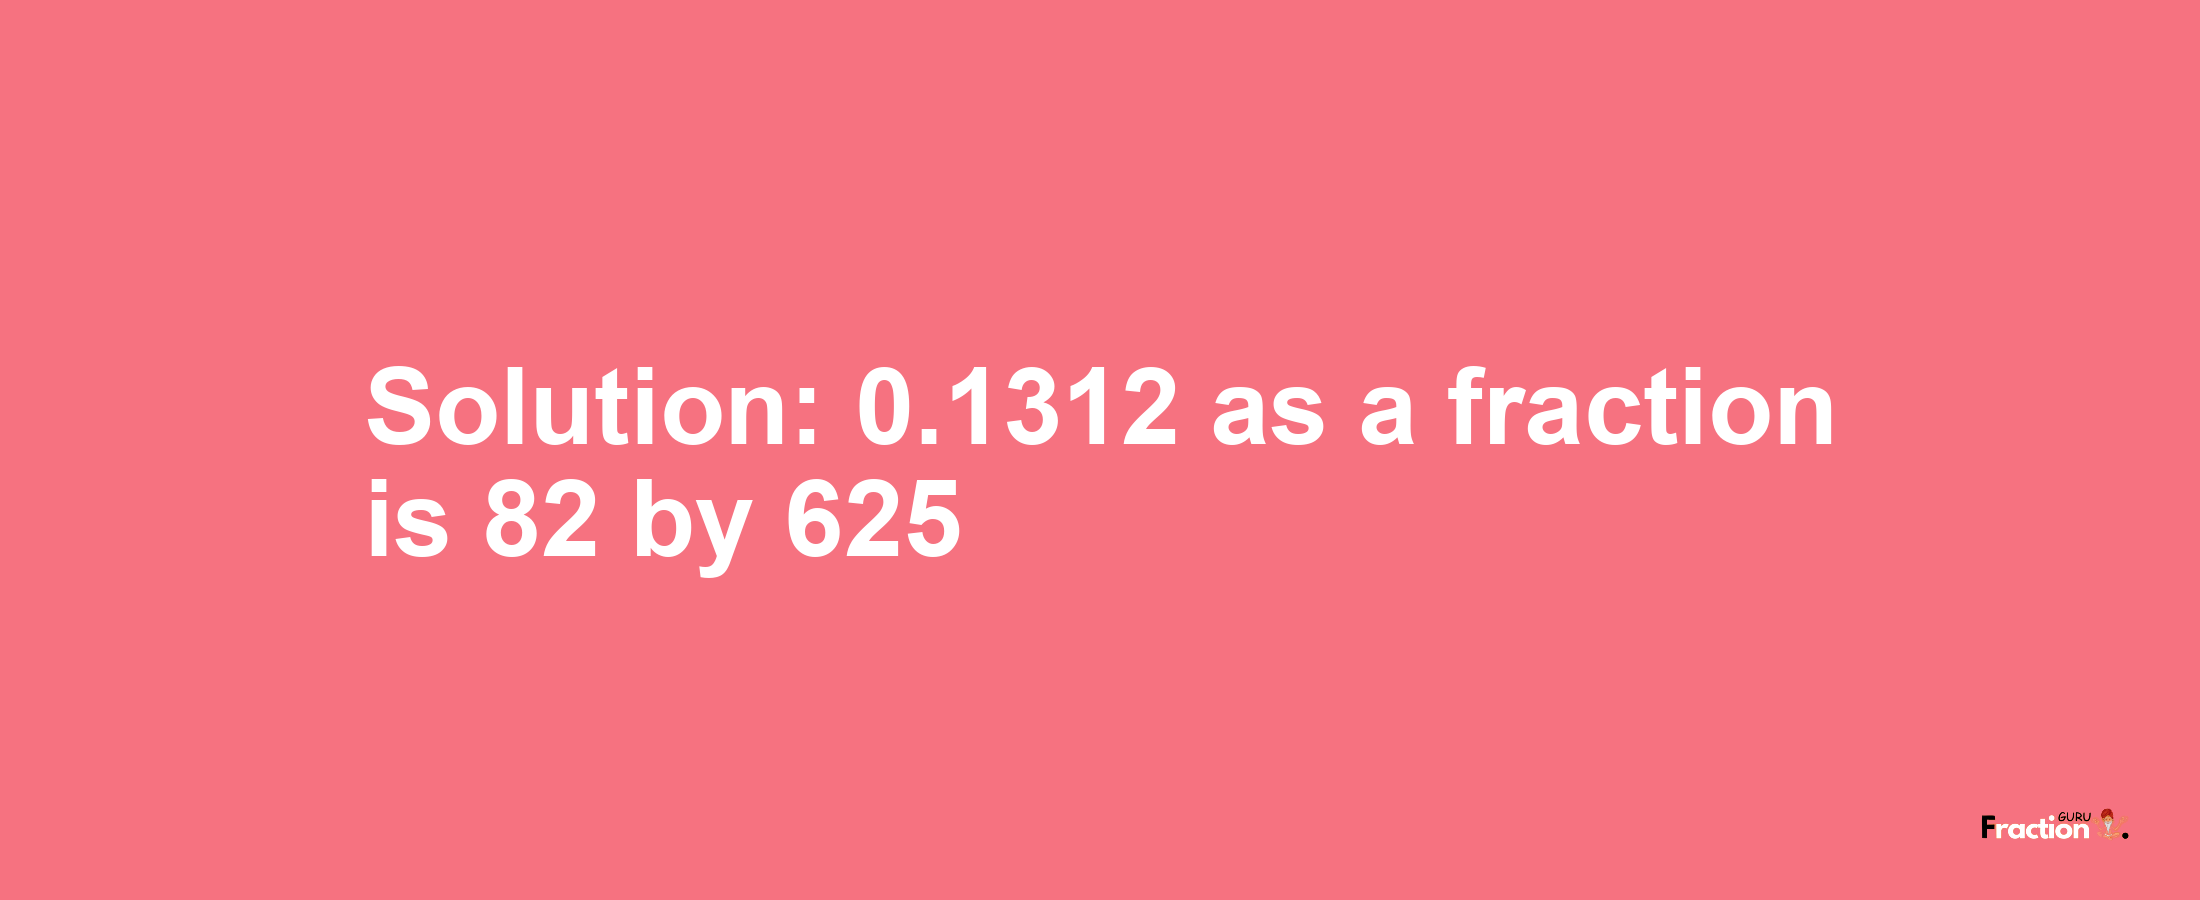 Solution:0.1312 as a fraction is 82/625